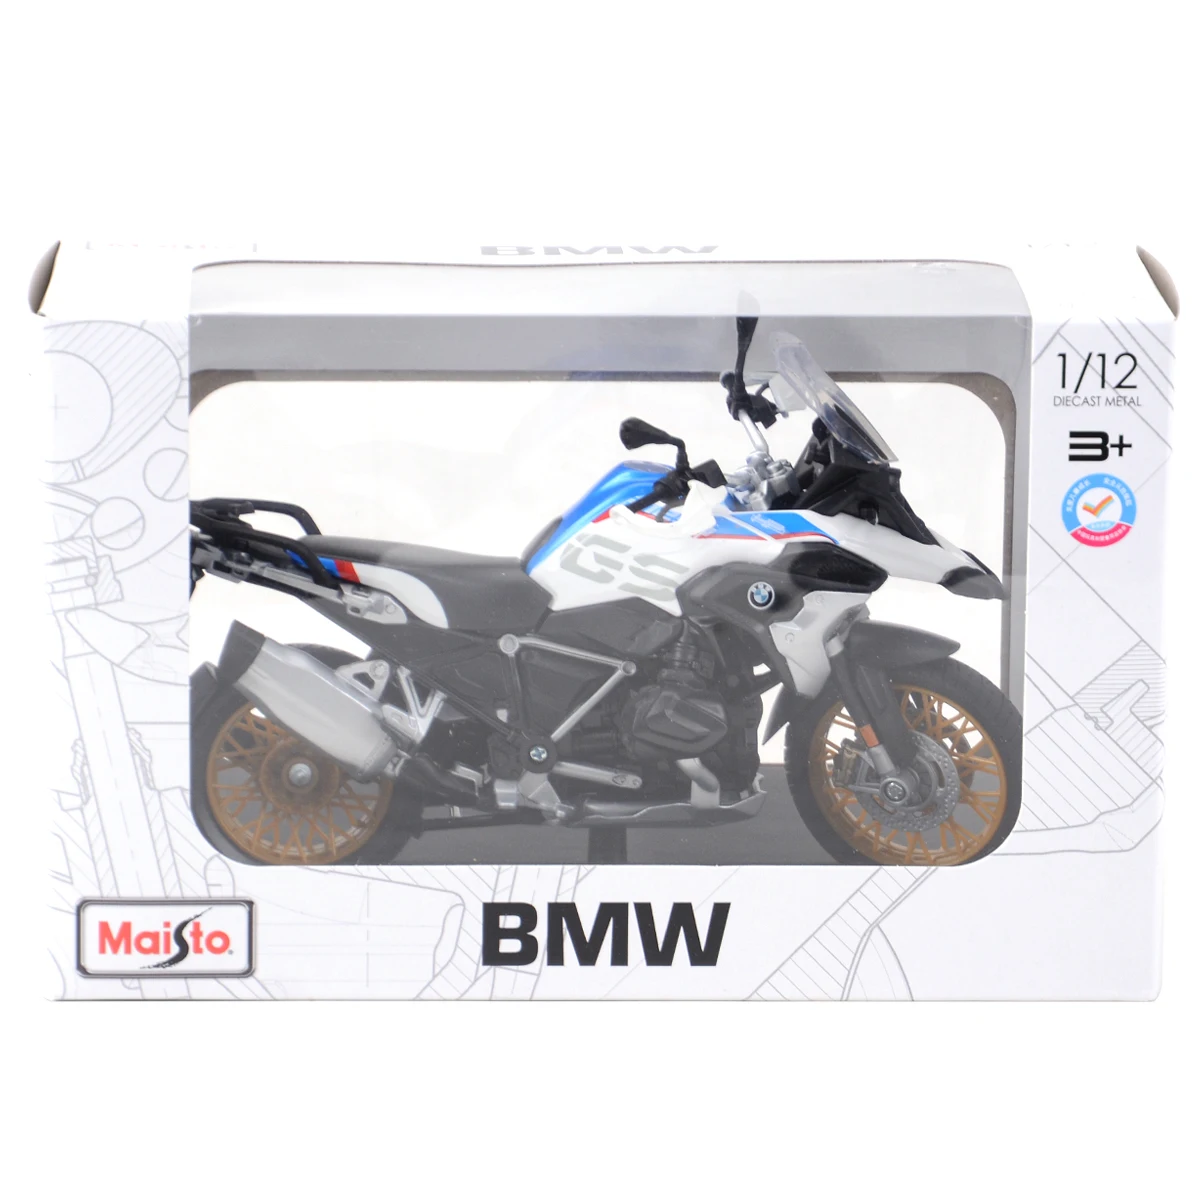 Maisto 1:12 BMW R1250GS With Stand Die Cast Vehicles Collectible Hobbies Motorcycle Model Toys